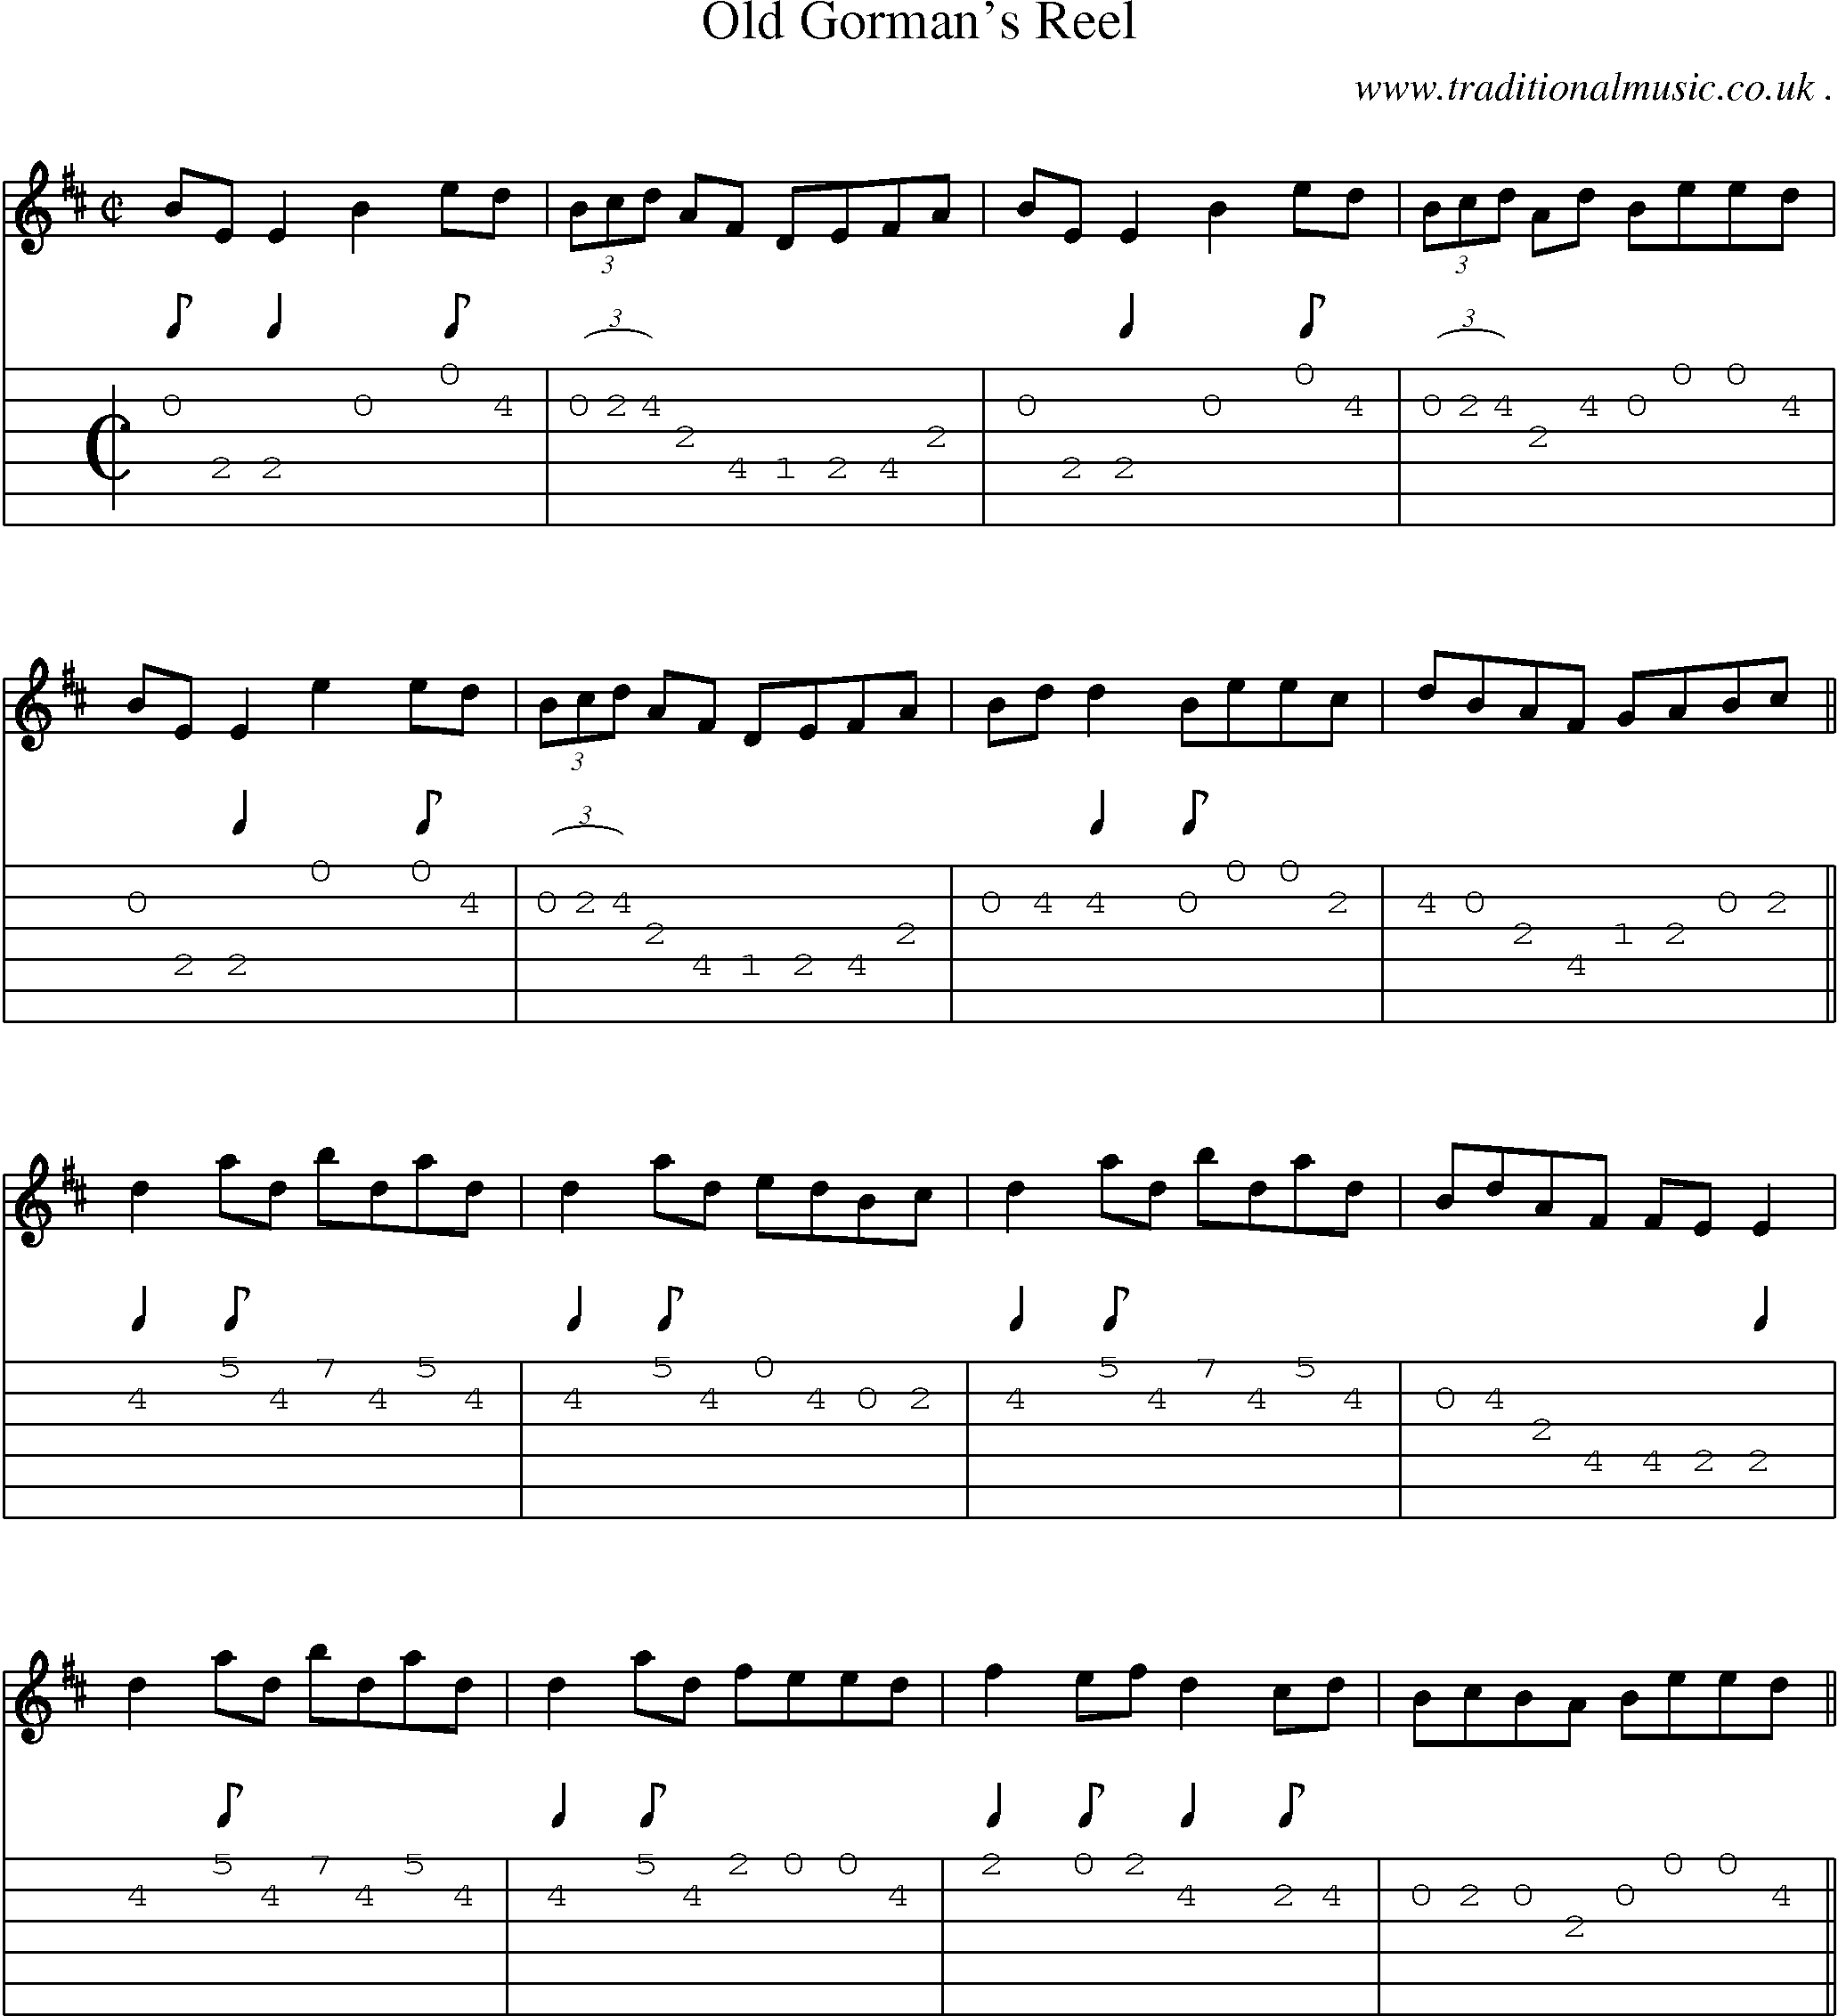 Sheet-Music and Guitar Tabs for Old Gormans Reel